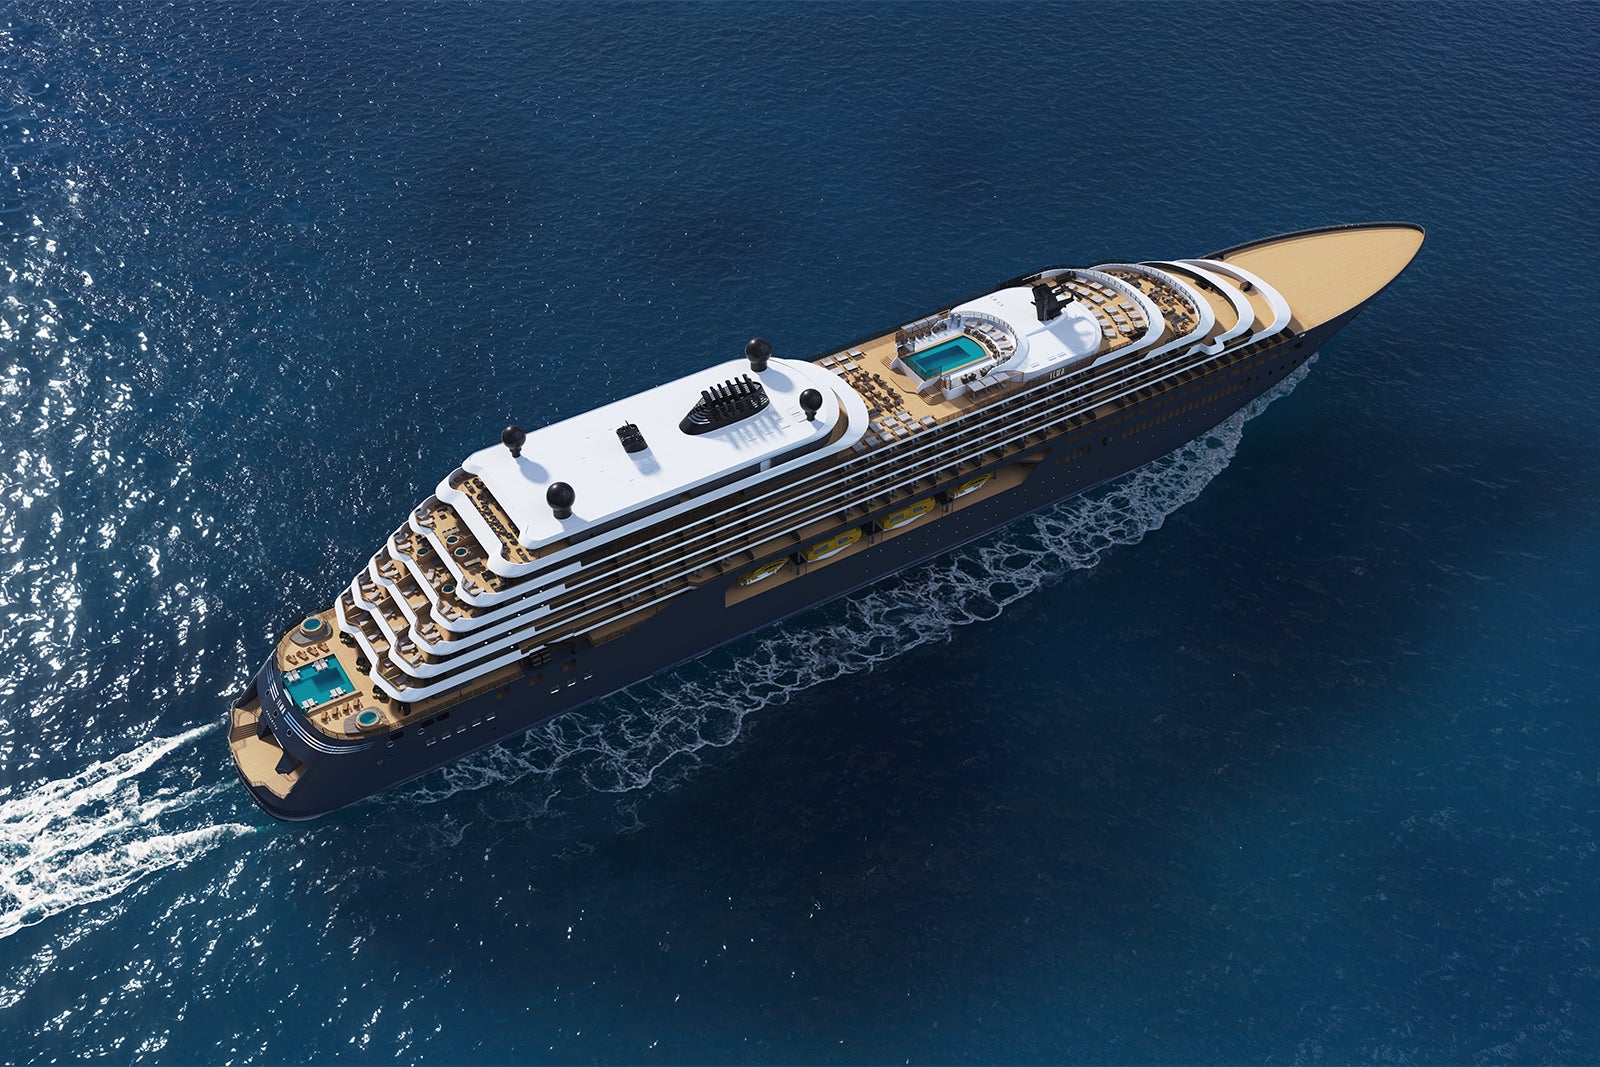 Artist's rendering of a luxury cruise yacht